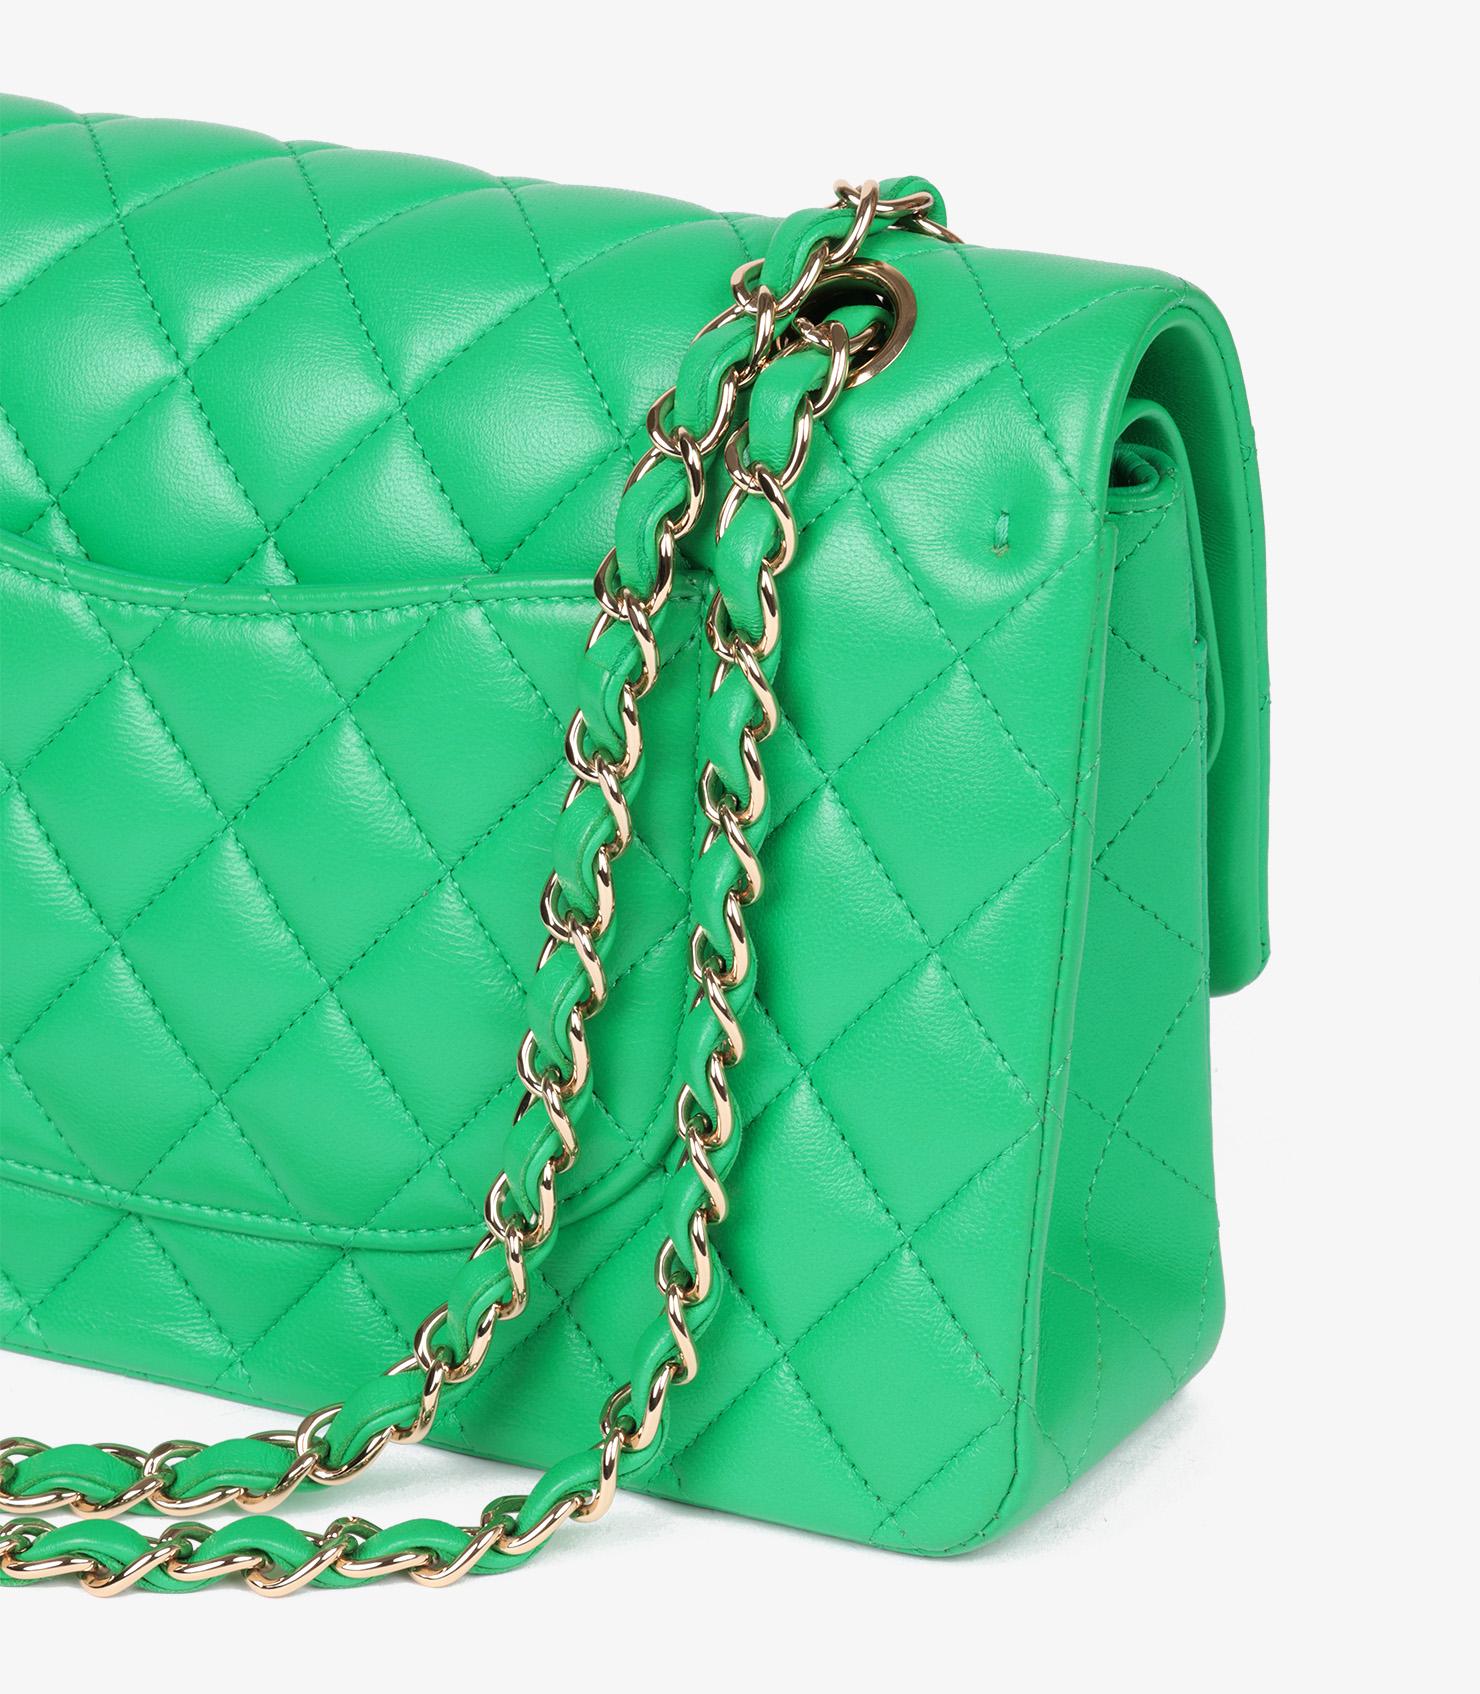 Chanel Green Quilted Lambskin Medium Classic Double Flap Bag 4